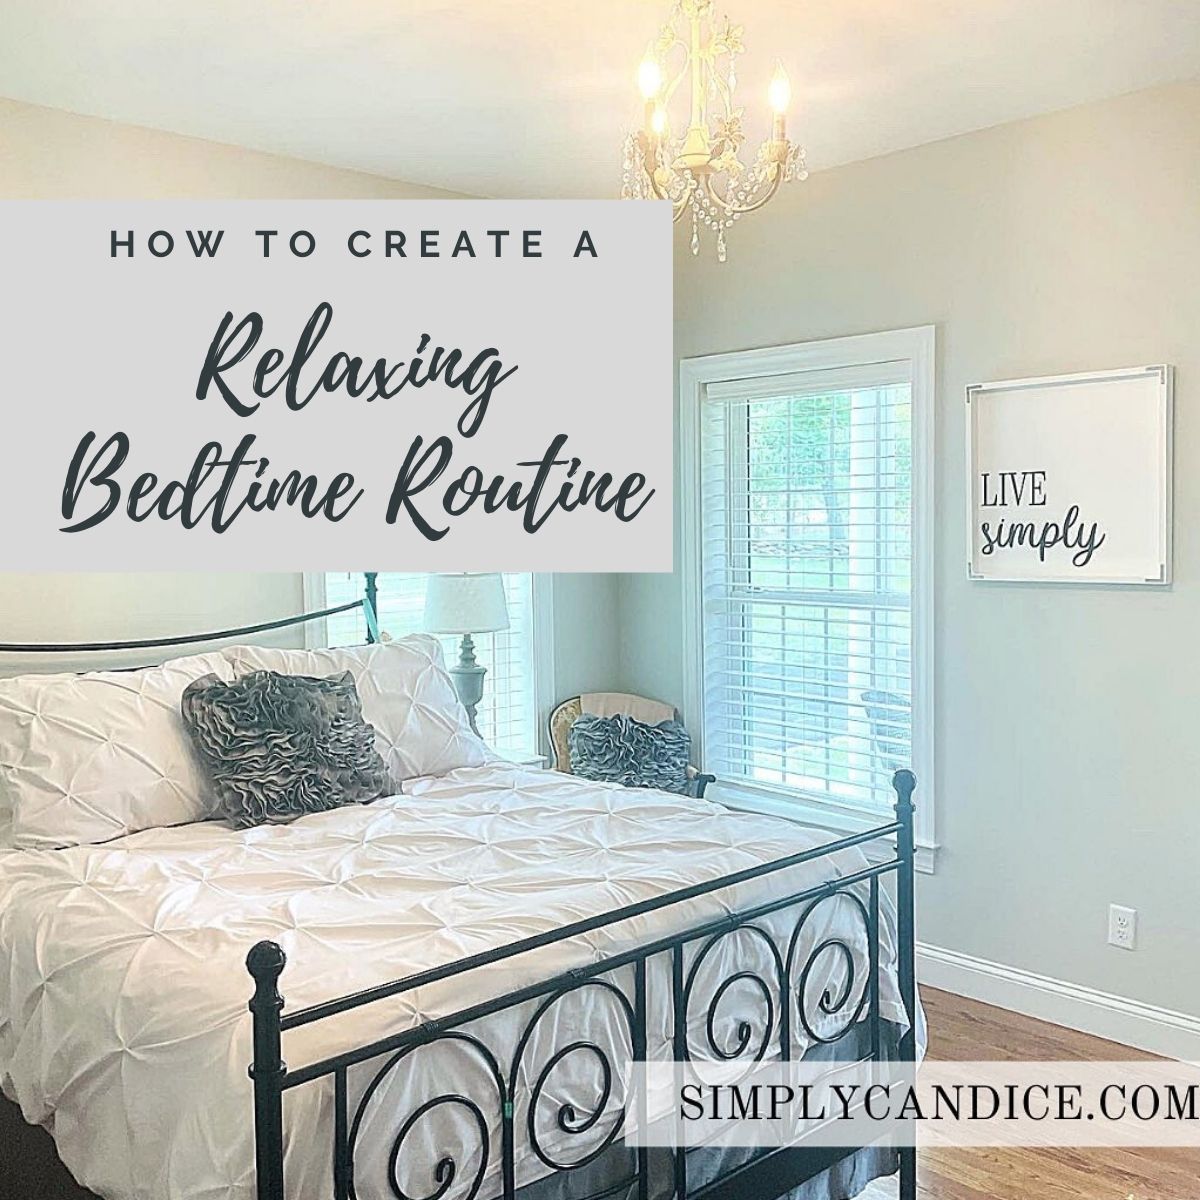 How to Create a Relaxing Bedtime Routine: Image of a bed with light gray walls and soft lighting